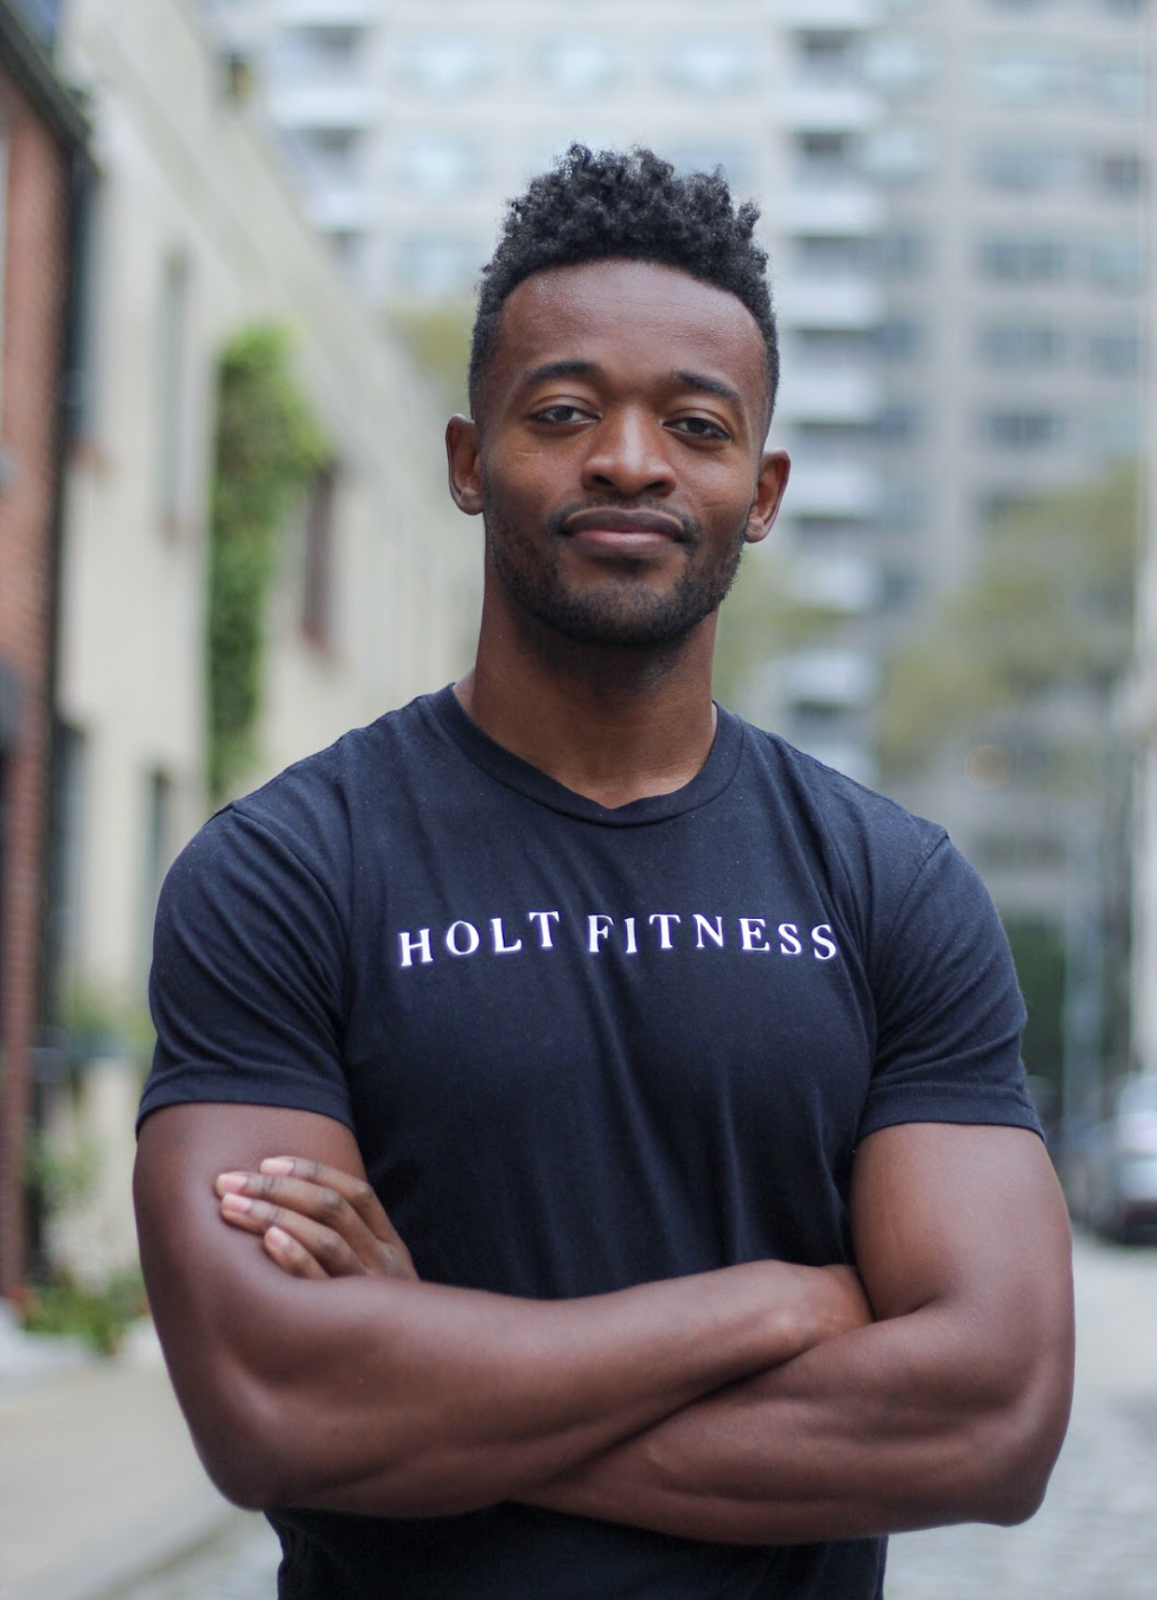 Holt Fitness, Saturday, April 17, 2021, Press release picture